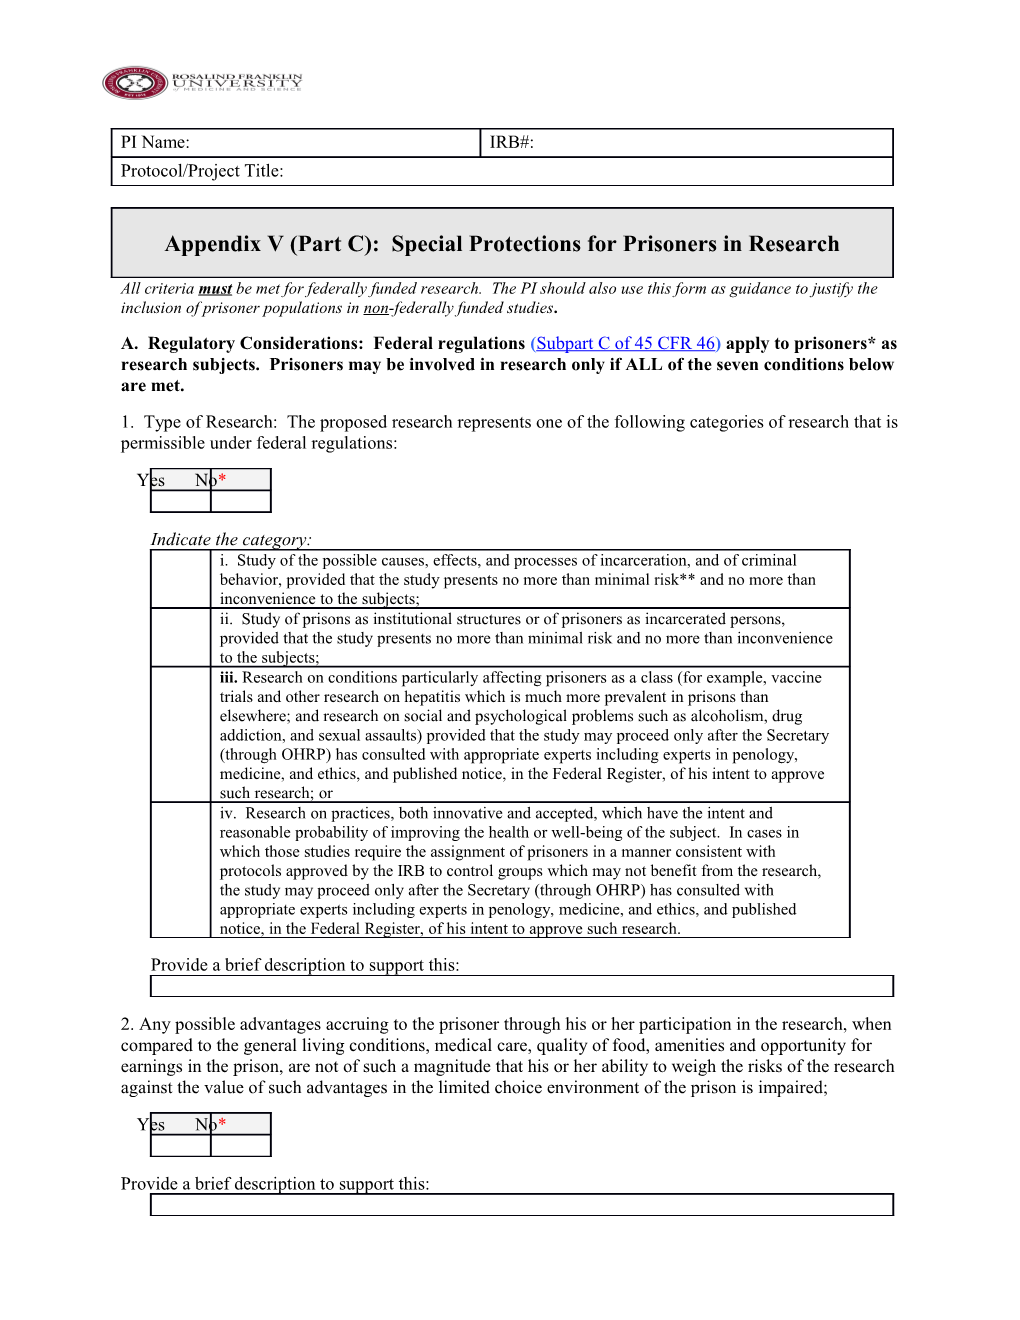 All Criteria Must Be Met for Federally Funded Research. the PI Should Also Use This Form